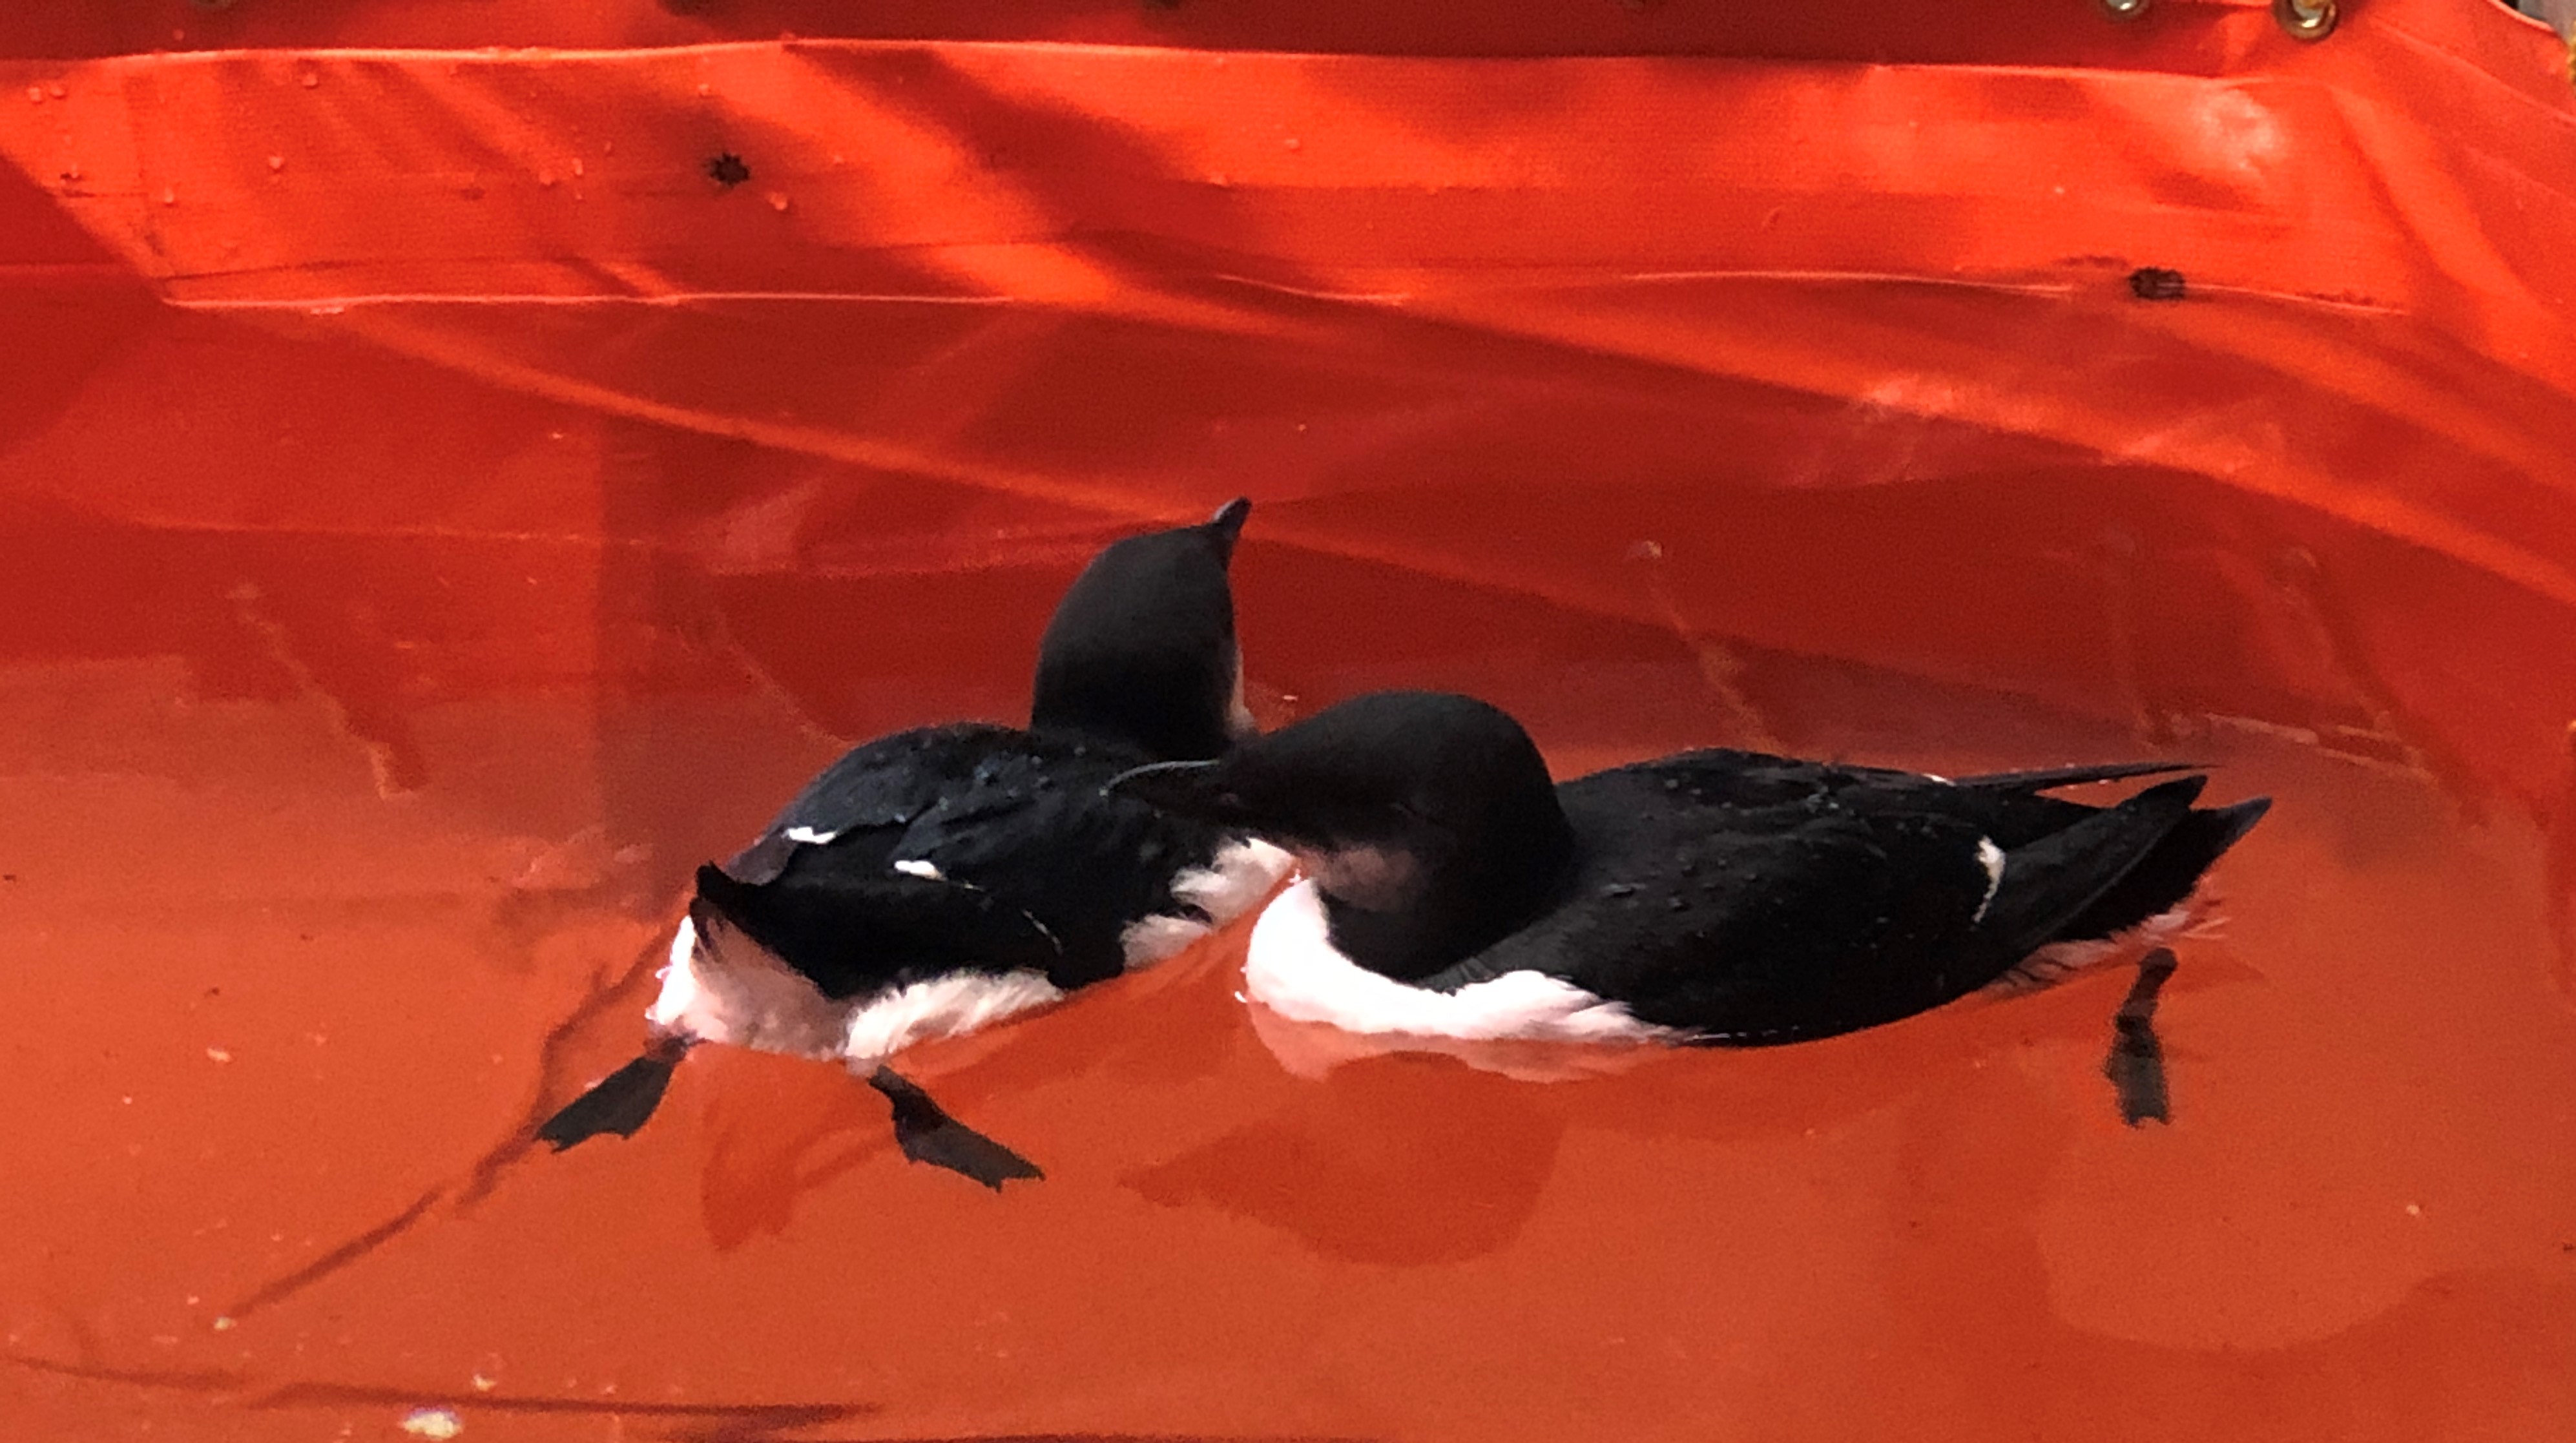 Thick Billed Murres